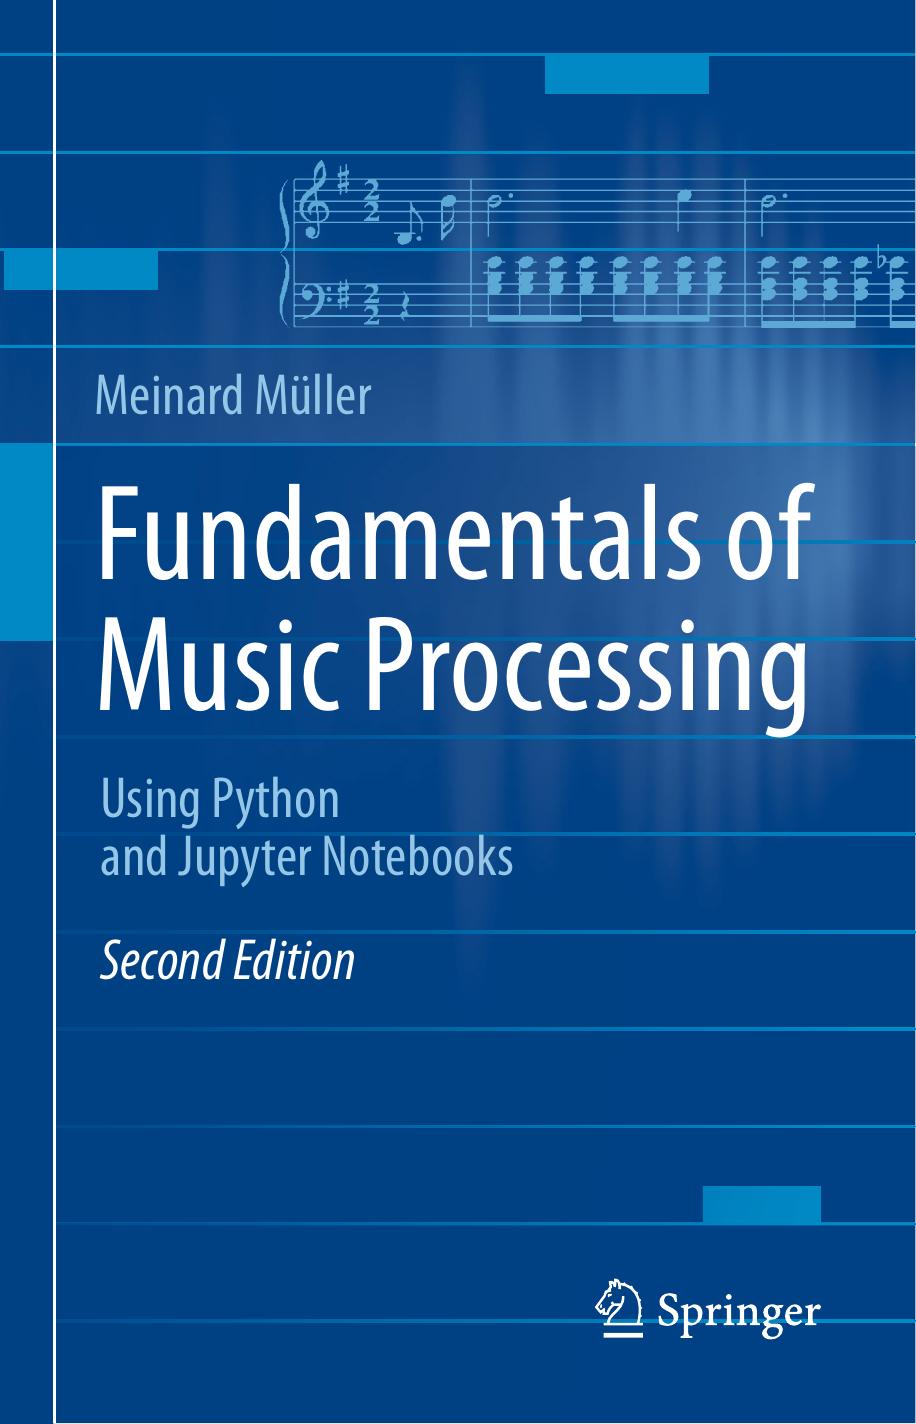 Fundamentals of Music Processing using Python and Jupyter Notebooks